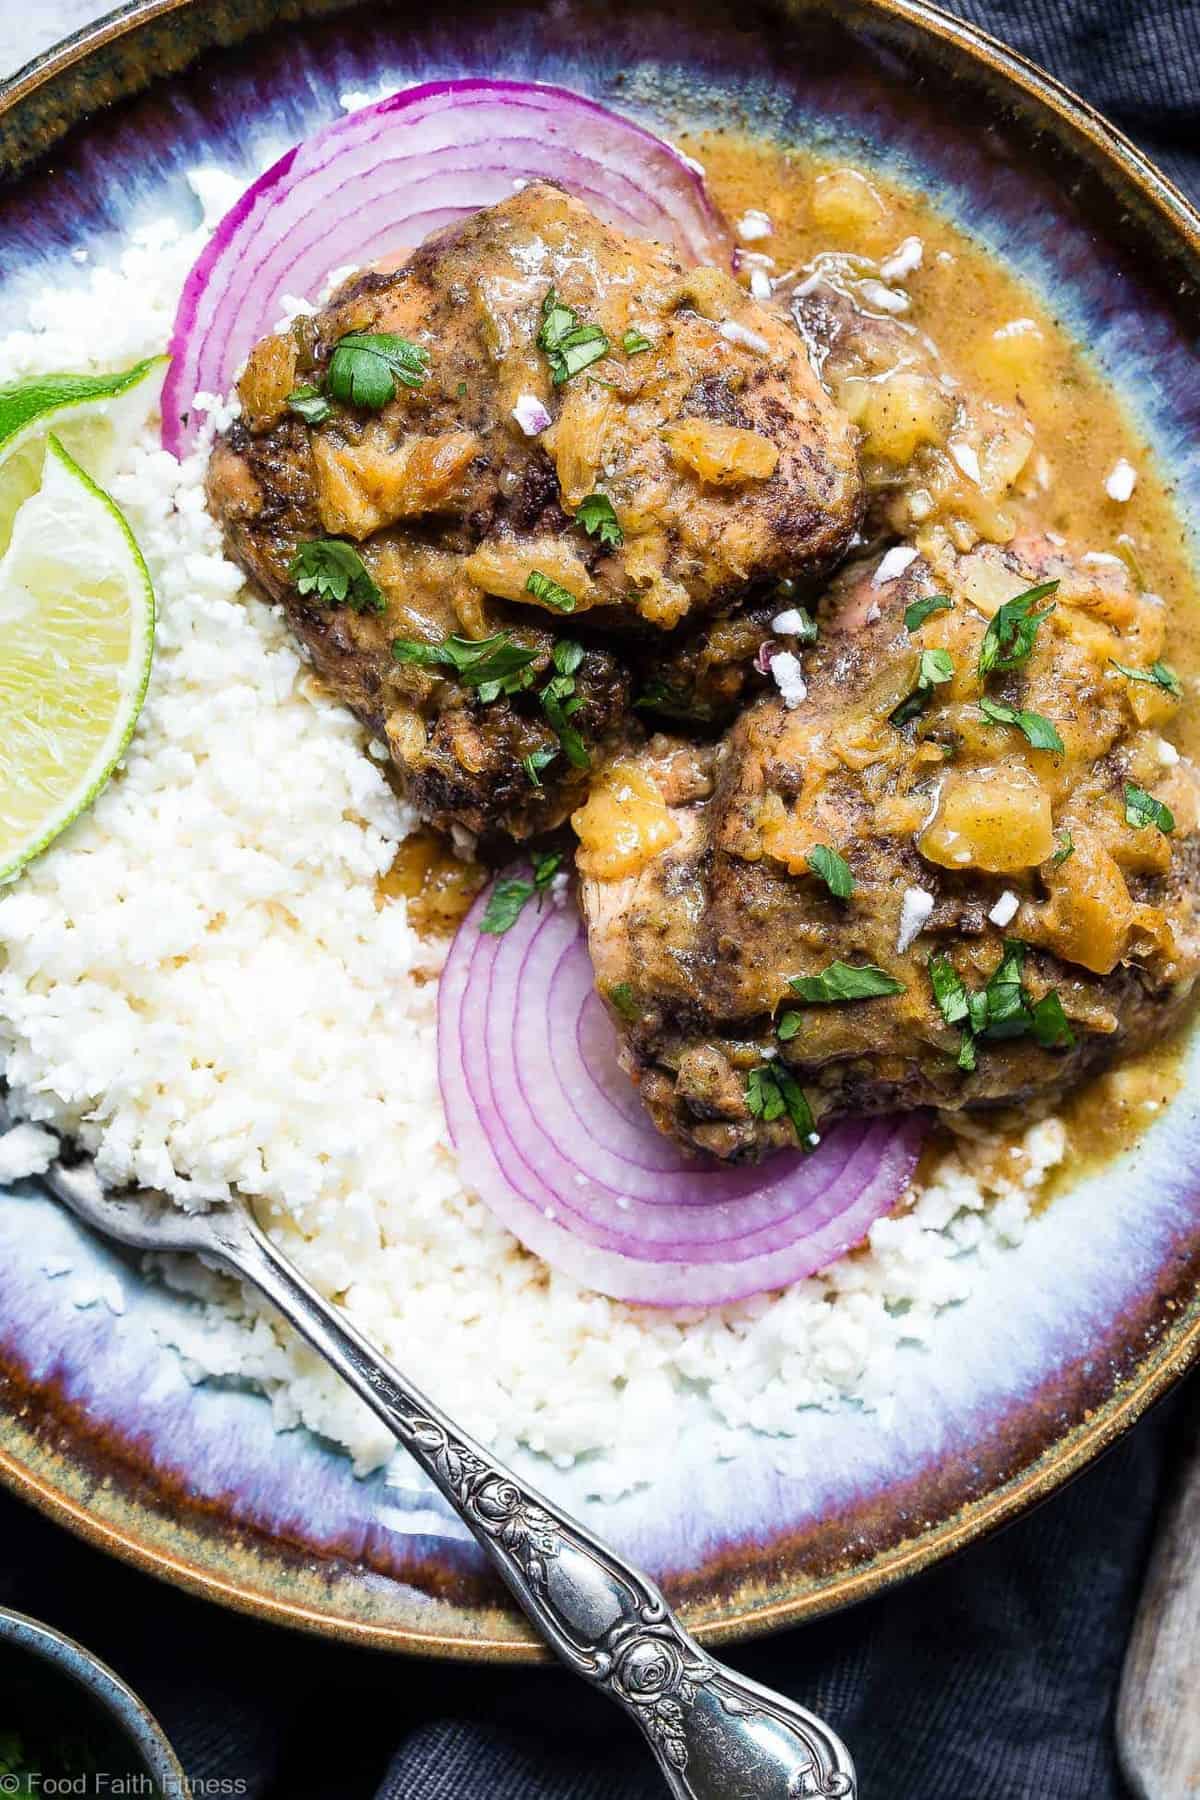 Whole30 Slow Cooker Jerk Chicken Curry - This crock pot jerk chicken curry is a CRAZY easy, weeknight dinner that is BIG on Island flavor! It's gluten free and paleo/whole30 compliant but it does not taste healthy AT all! Makes the BEST leftovers! | #Foodfaithfitness | #Glutenfree #Paleo #Whole30 #Dairyfree #Slowcooker